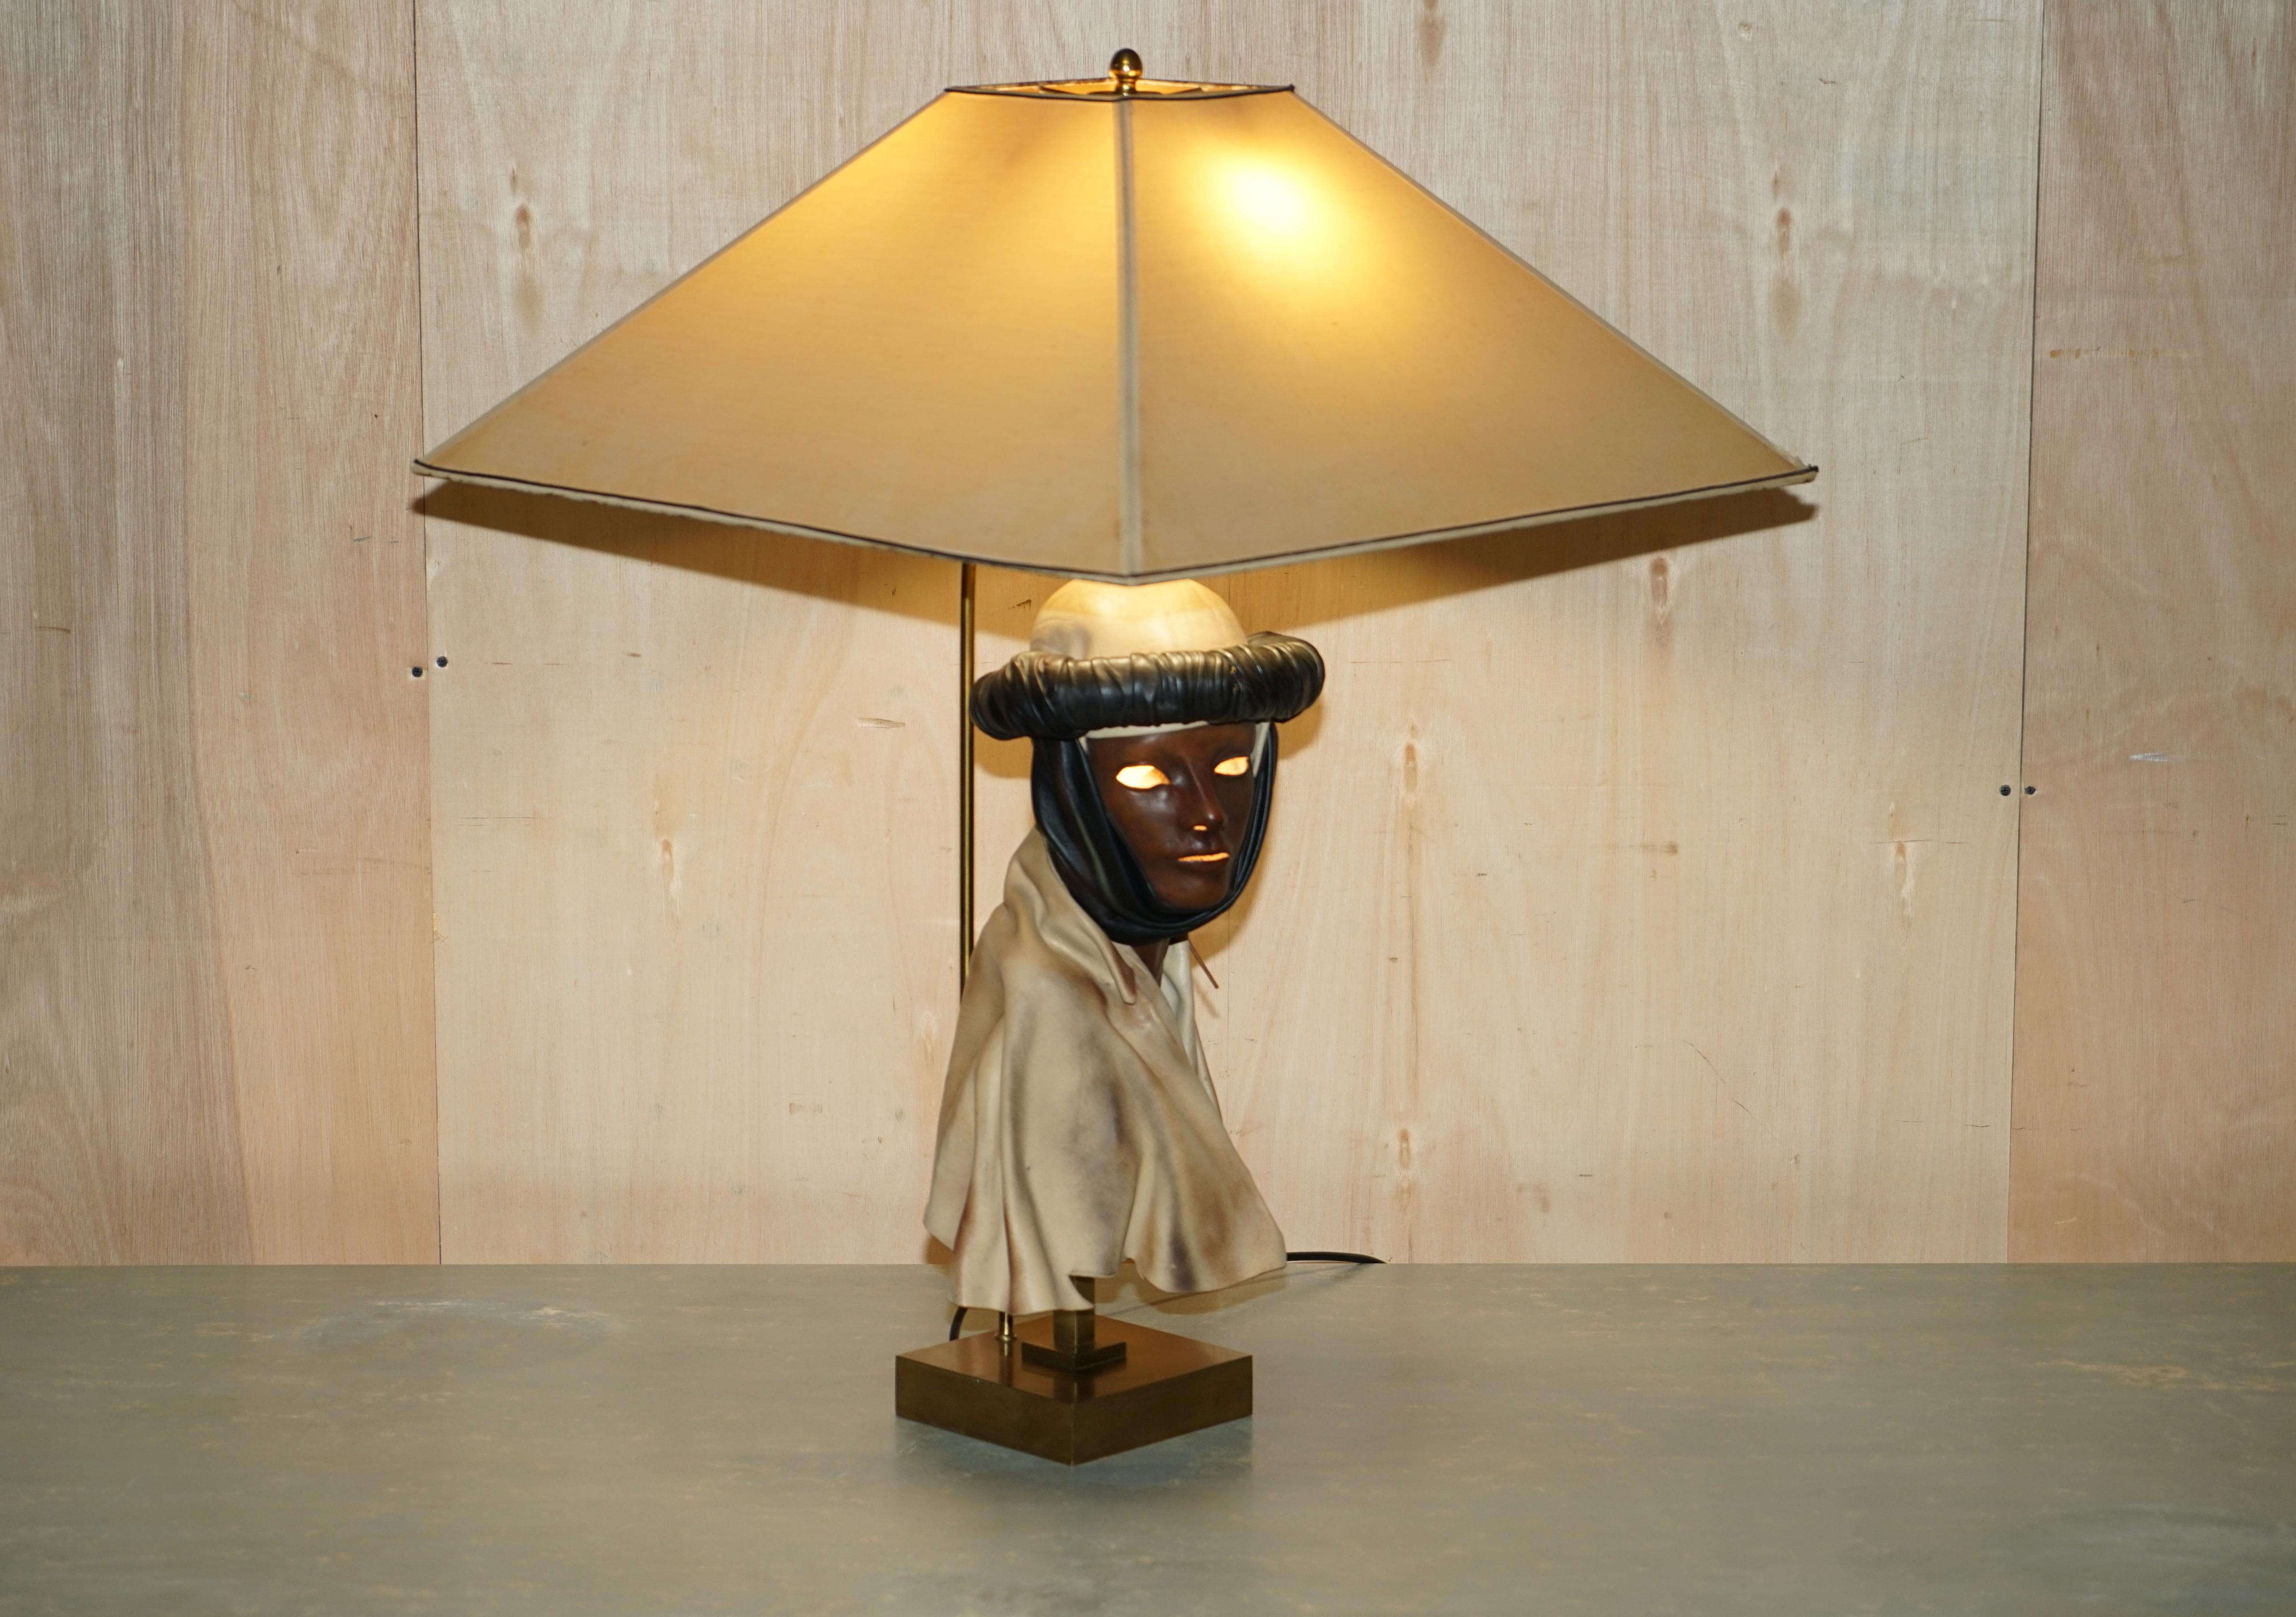 We are delighted to offer for sale this well-made vintage circa 1960s Pourbaix signed Face table lamp.

A good looking well made a decorative lamp, depicting an Arabian robed figure, its very poignant 

It has been fully restored to include a